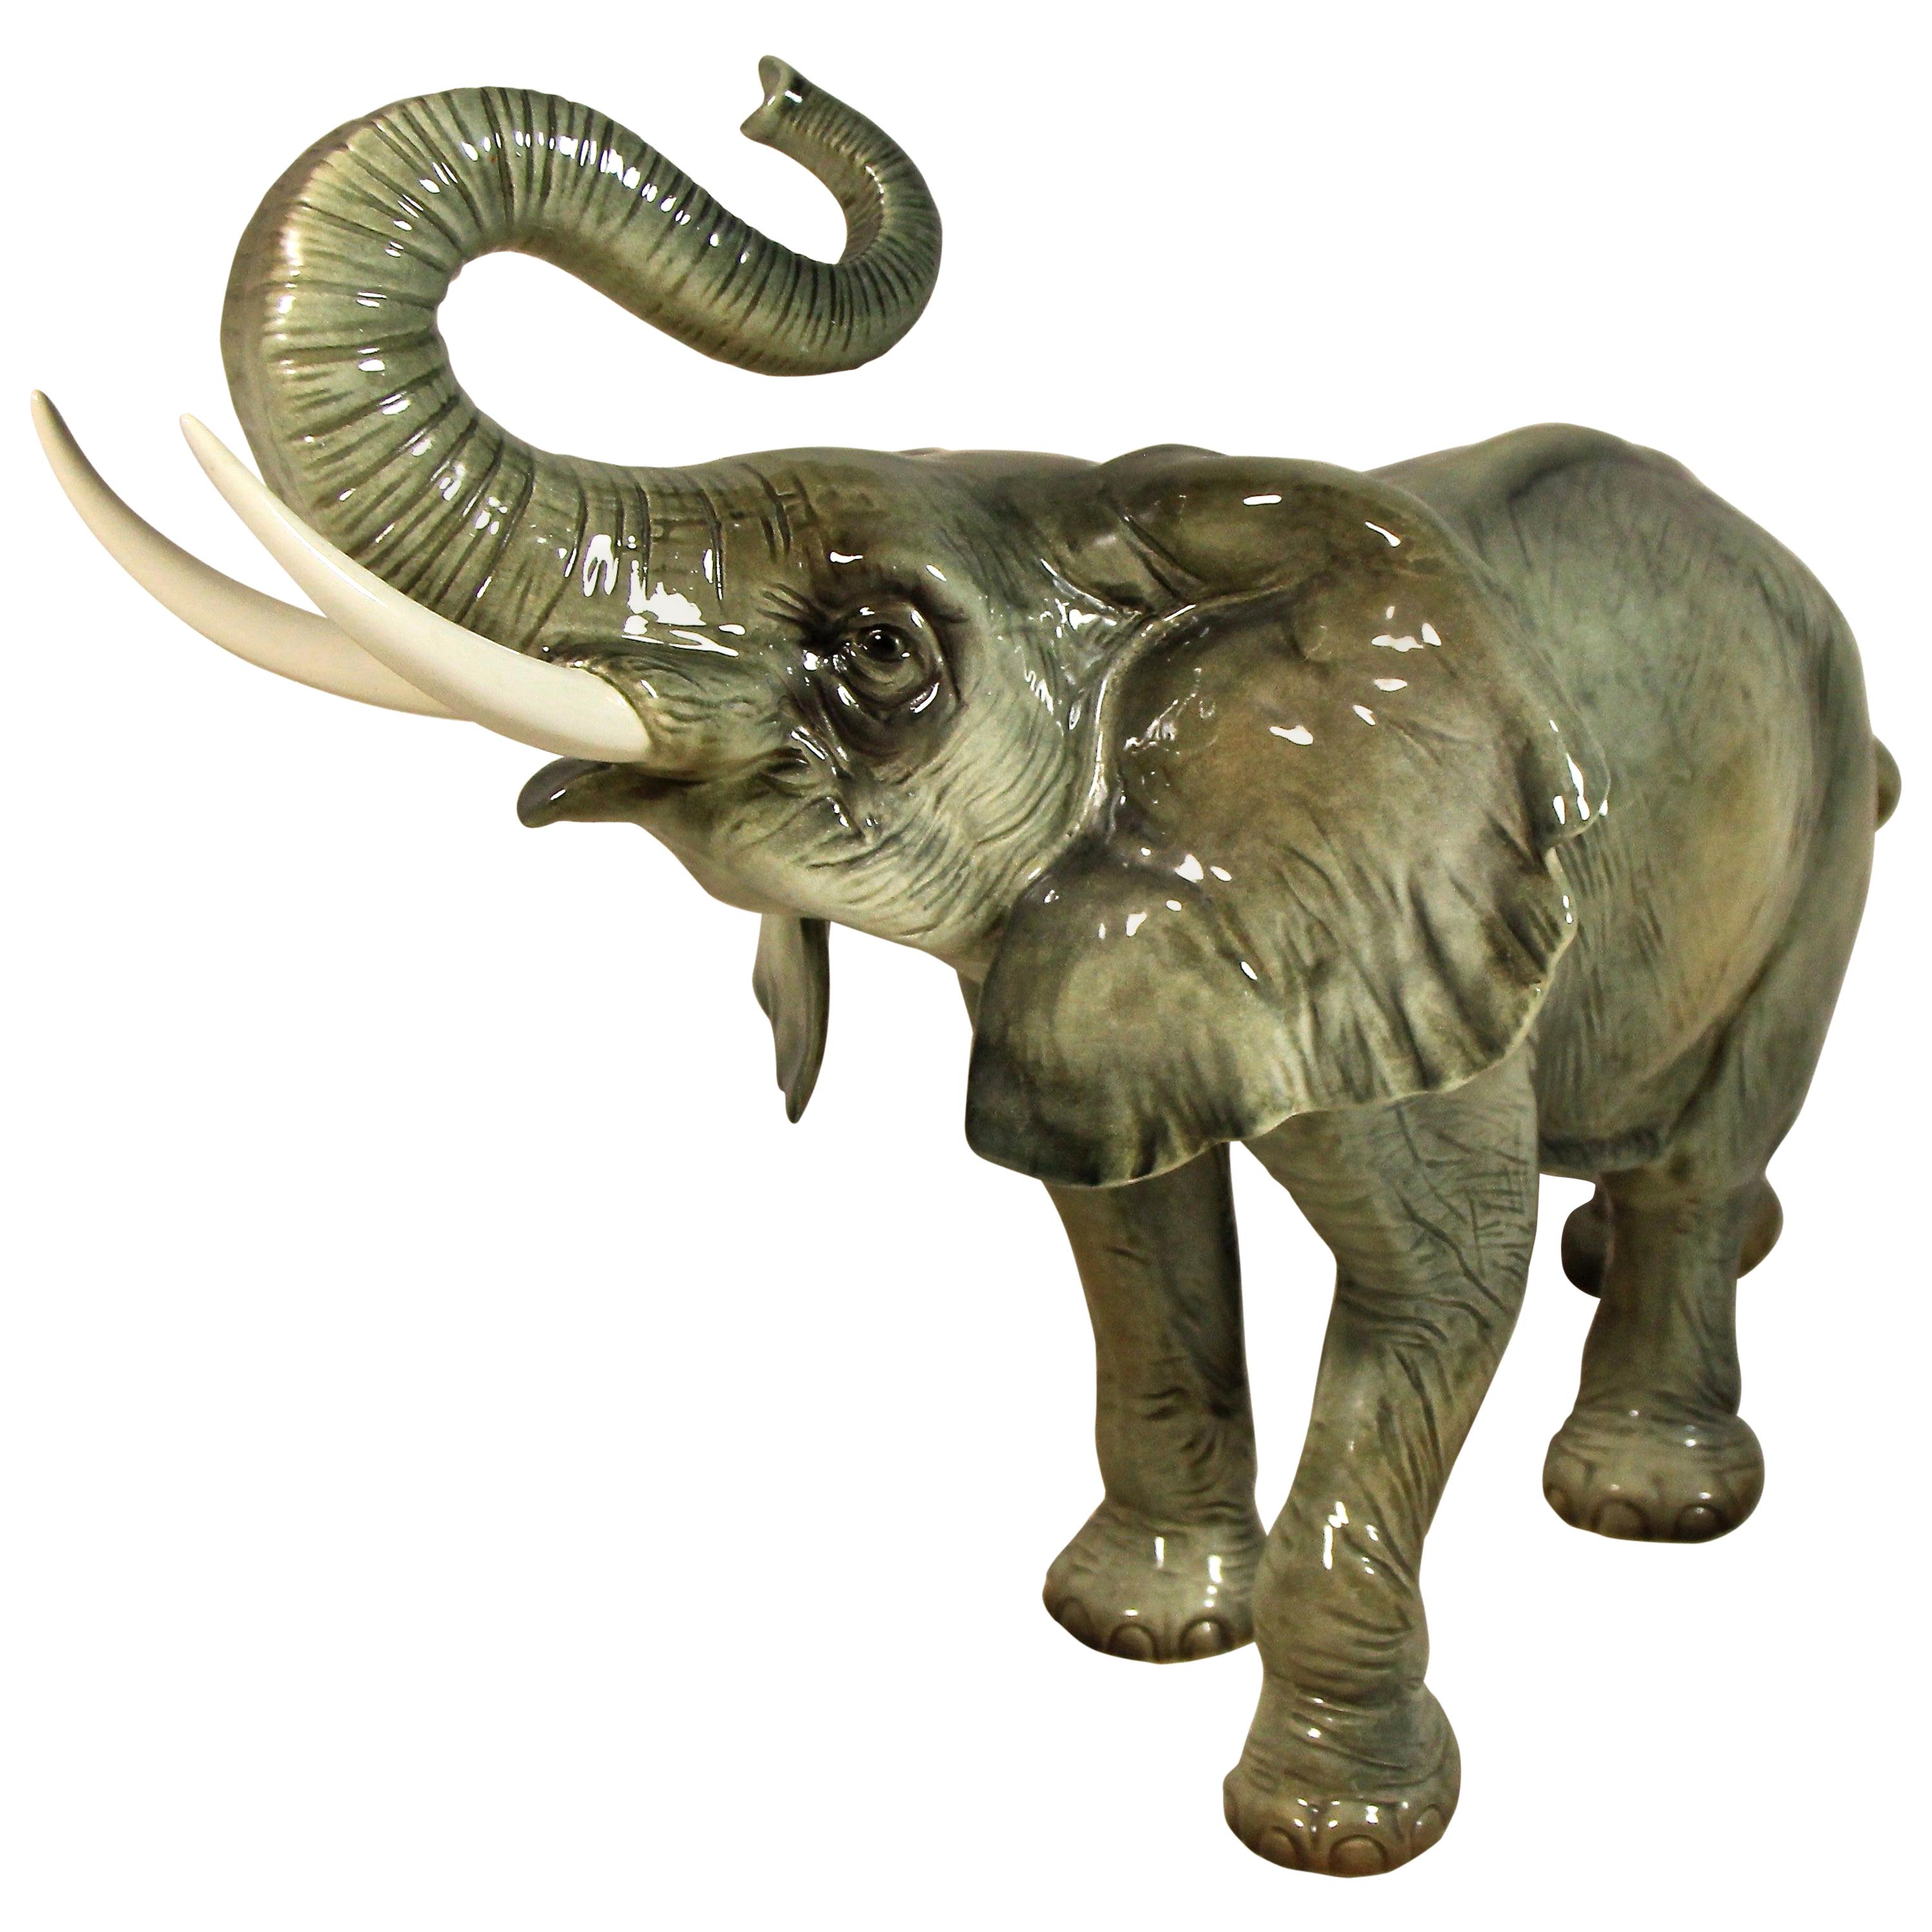 Beautiful porcelain elephants from the 20th century made by the world famous porcelain manufacture Goebel (Hummel) in Germany with nice playful details. The lifelike design and the amazing grey painting makes this big porcelain elephants a highly